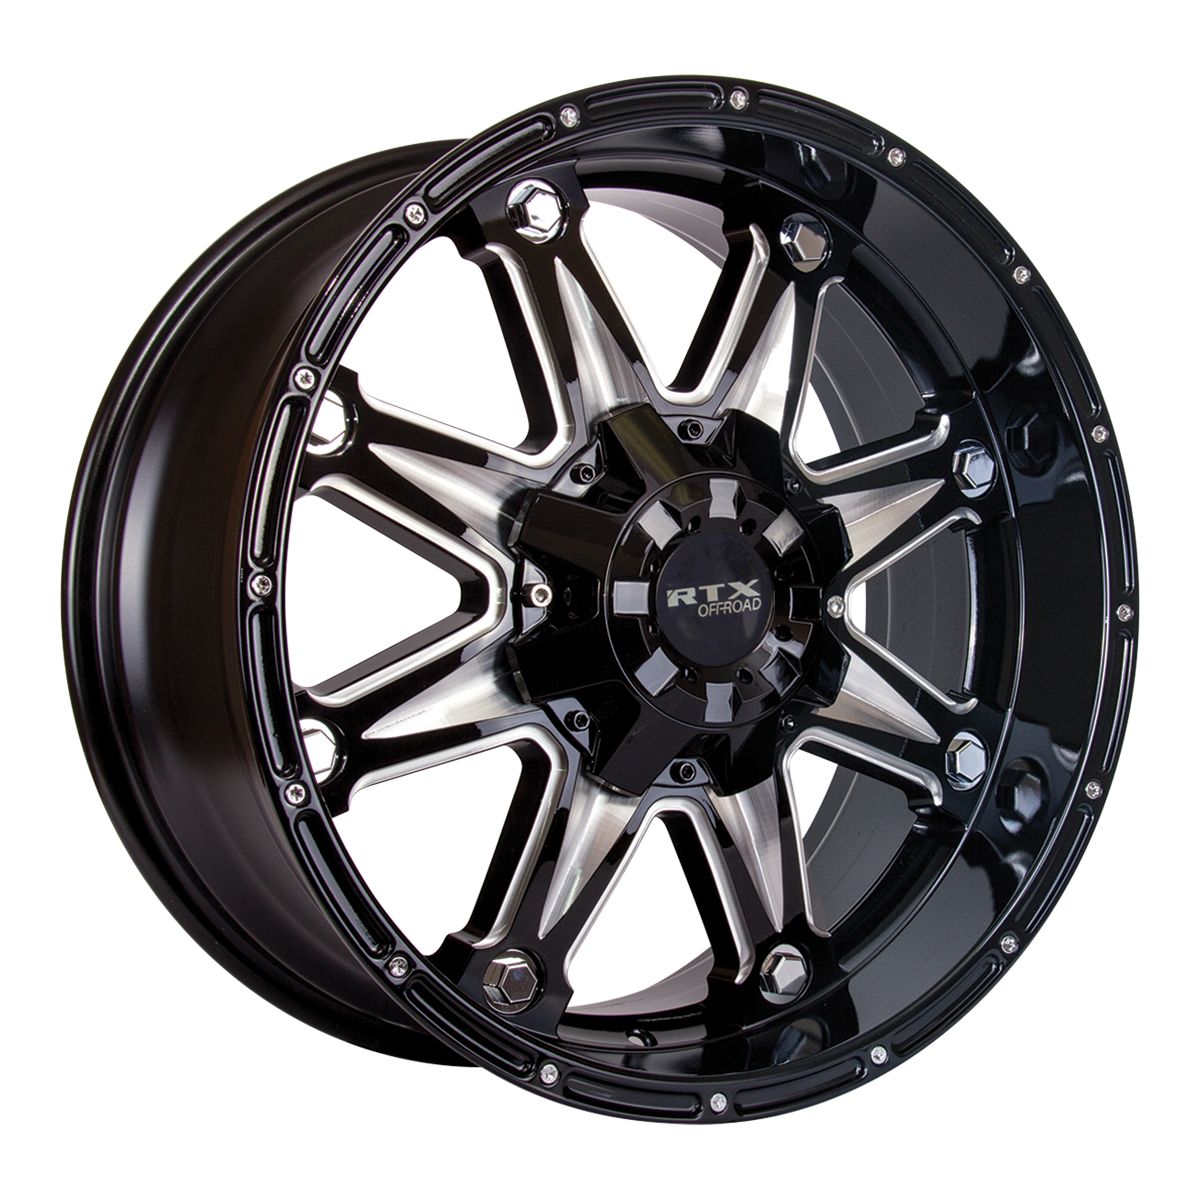 Spine • Black with Milled Spokes • 17x9 5x135/139.7 ET0 CB87.1